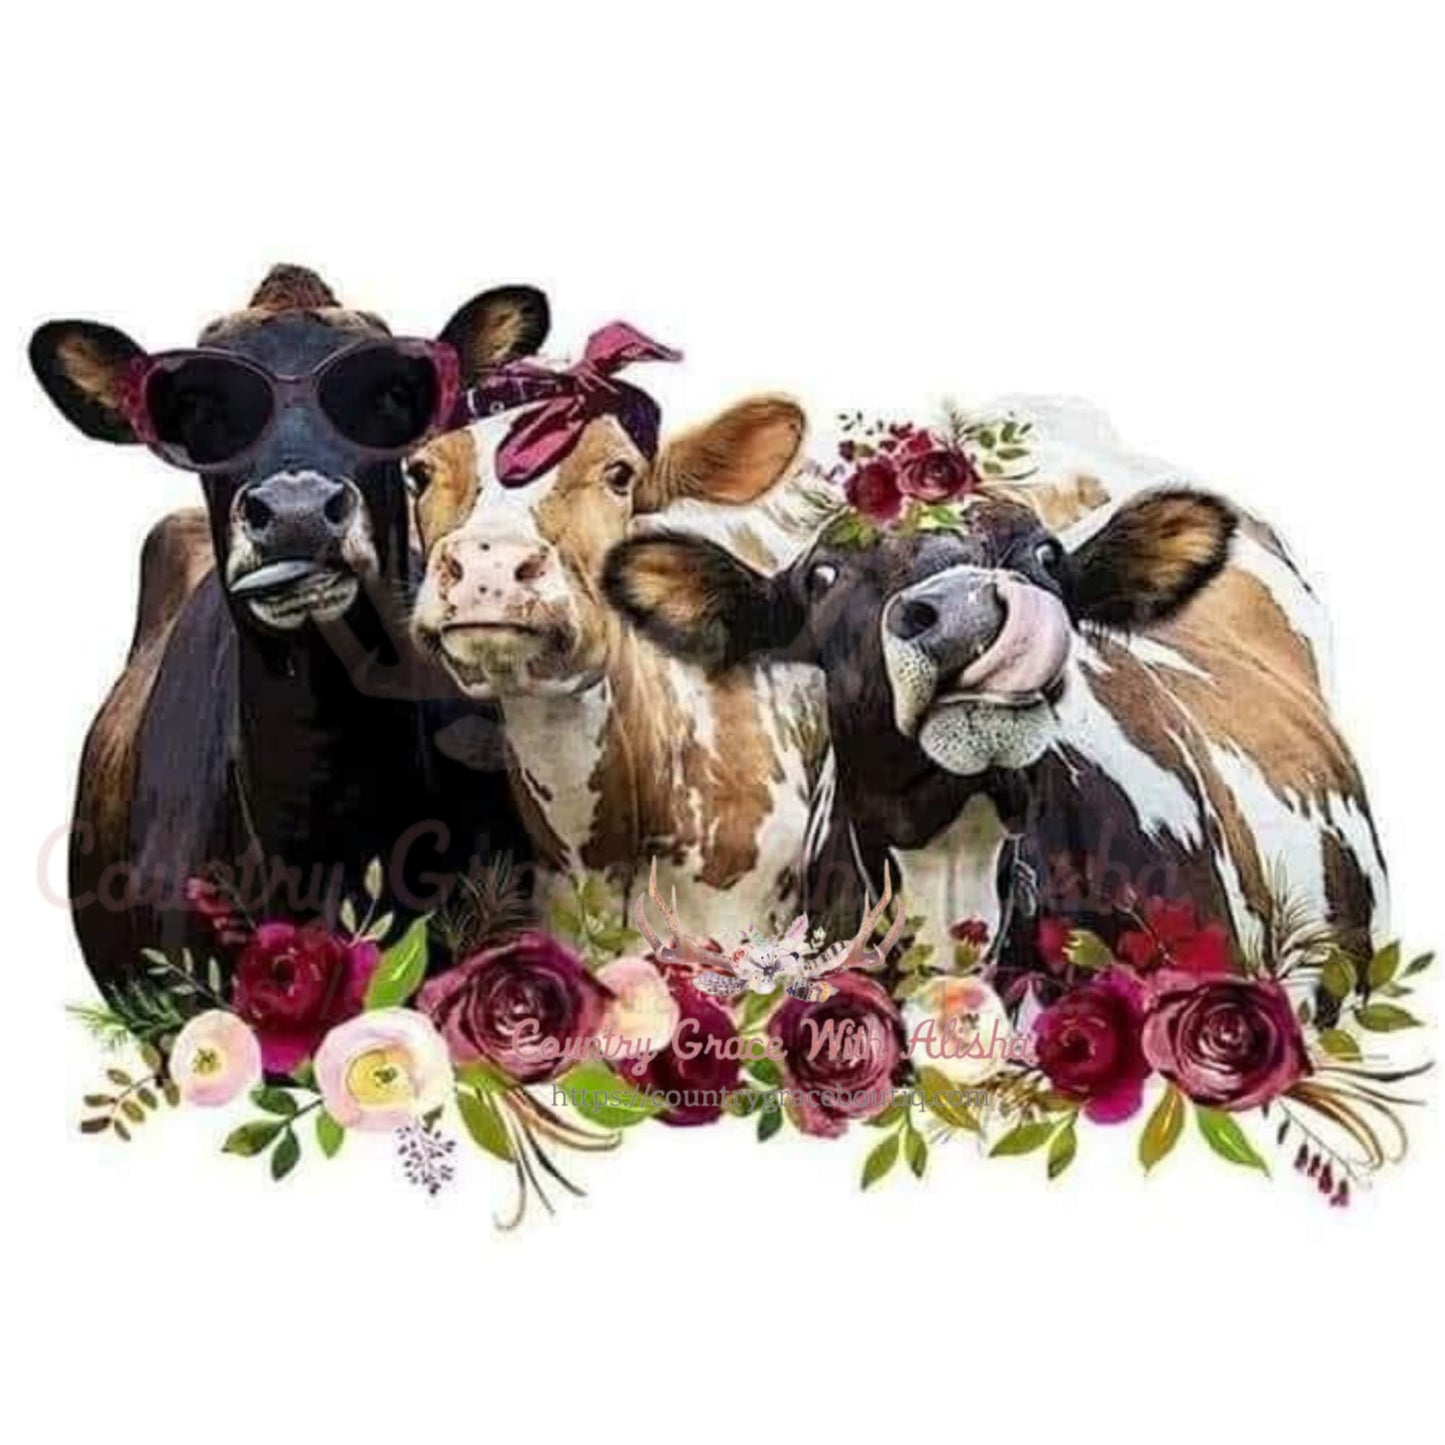 Crazy Cows Sublimation Transfer - Sub $1.50 Country Grace 